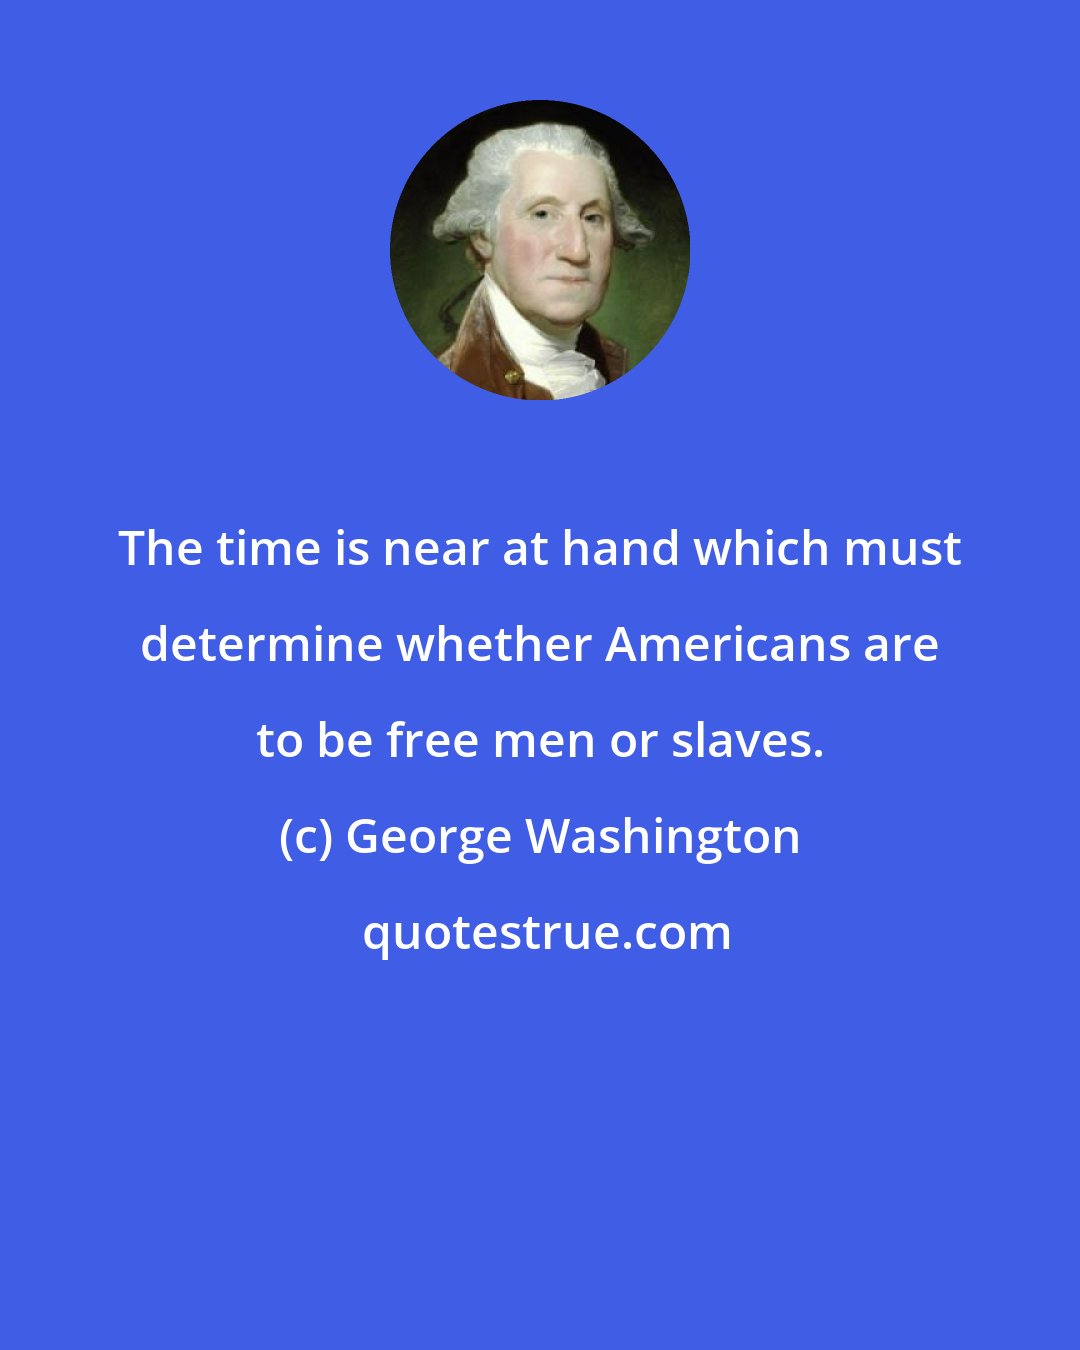 George Washington: The time is near at hand which must determine whether Americans are to be free men or slaves.